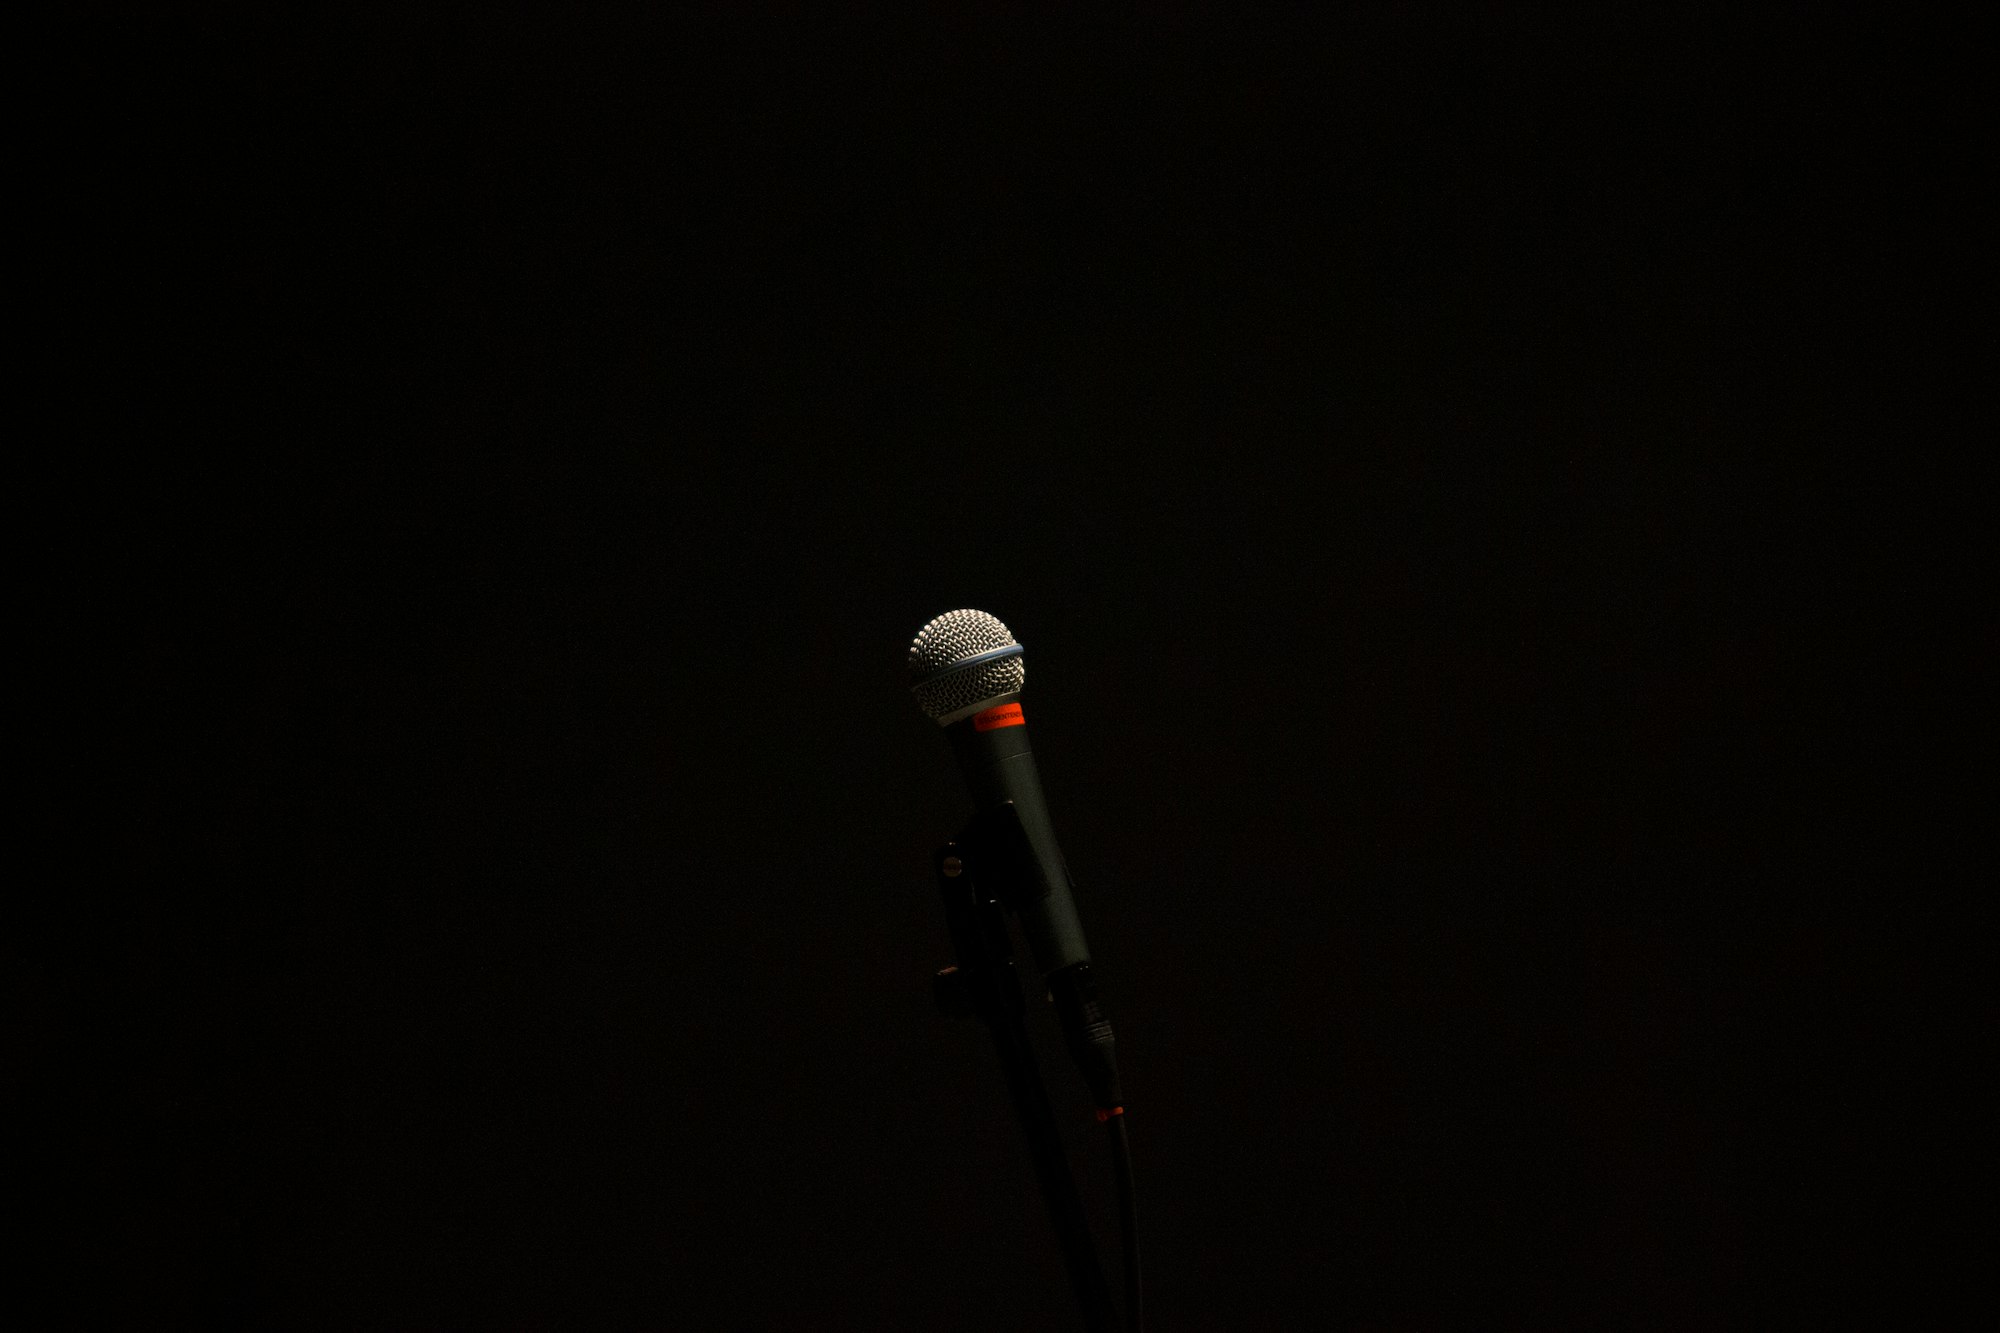 I have always loved minimal photos, but never something I’ve manged to gotten quite right myself. This shot I was quite surprised with and how much I ended up liking it. Was shot while practicing some music photography for a band doing some practice playing.